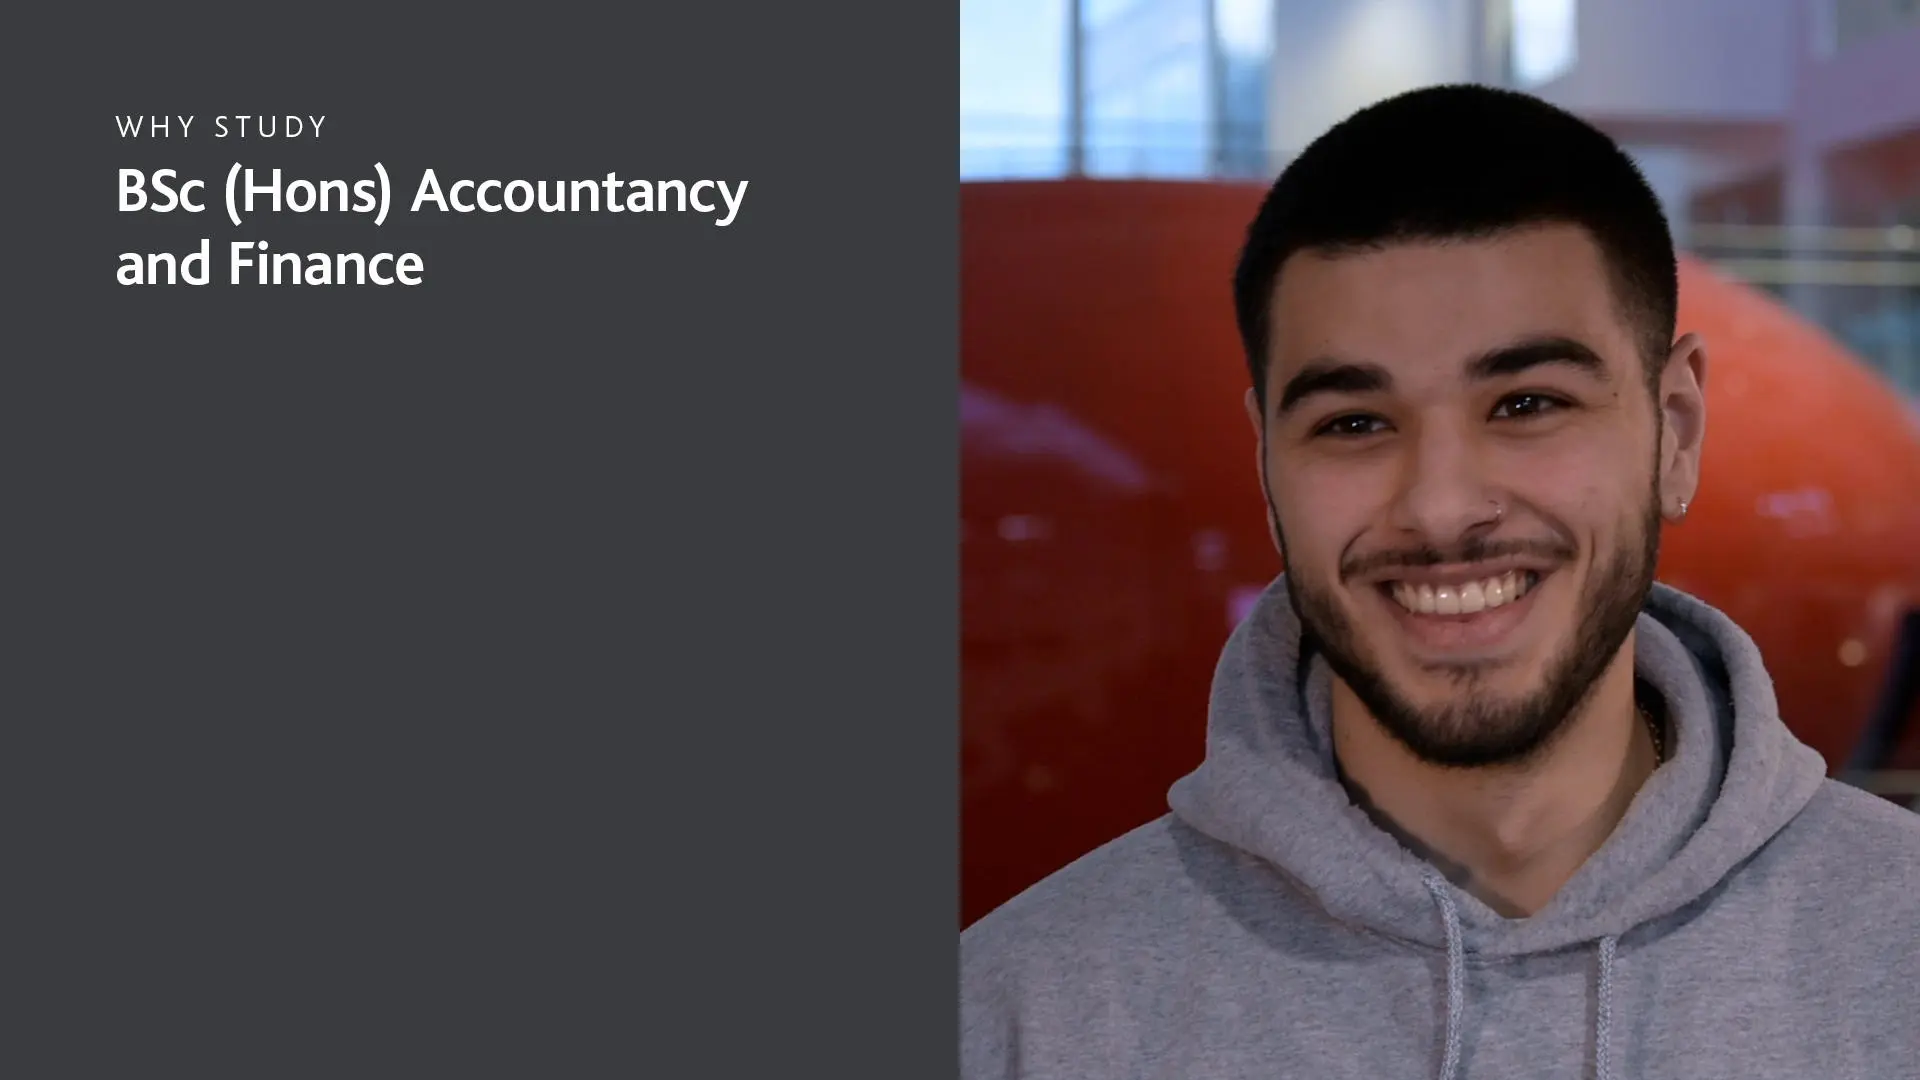 A video thumbnail of Video thumbnail - why study accountancy and finance? Featuring a smiling male student